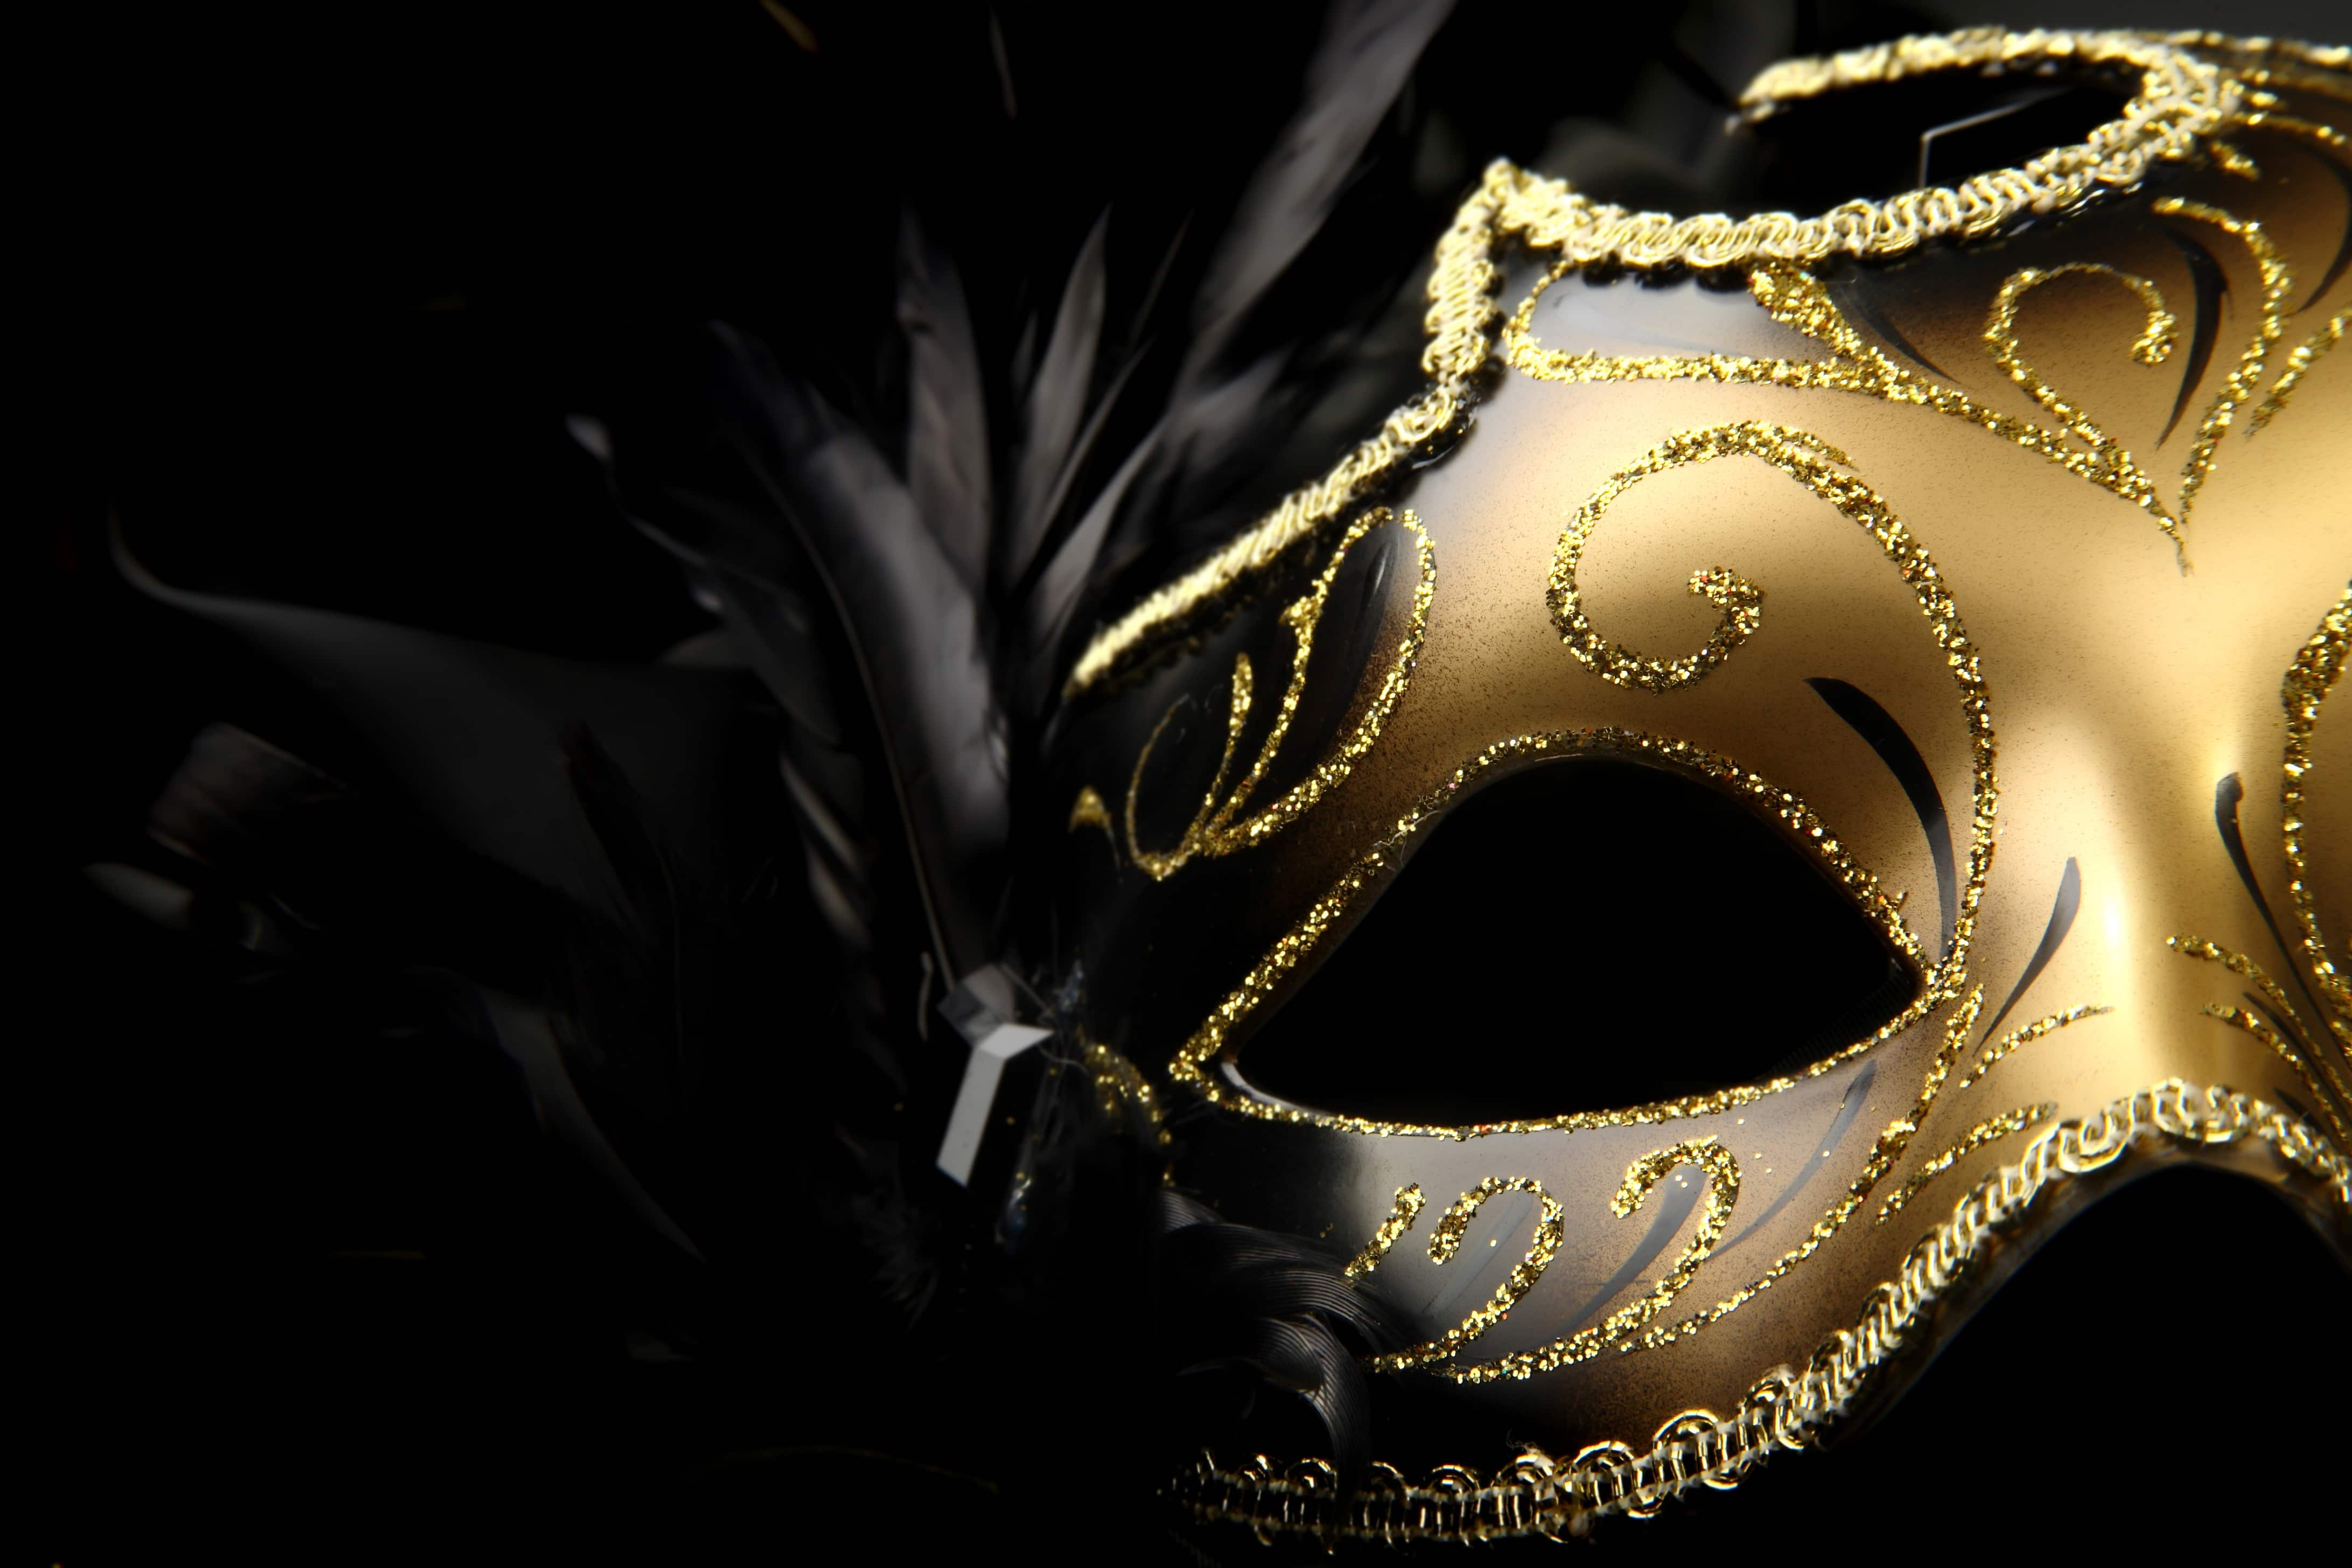 The Complete playlist for your next Masquerade party